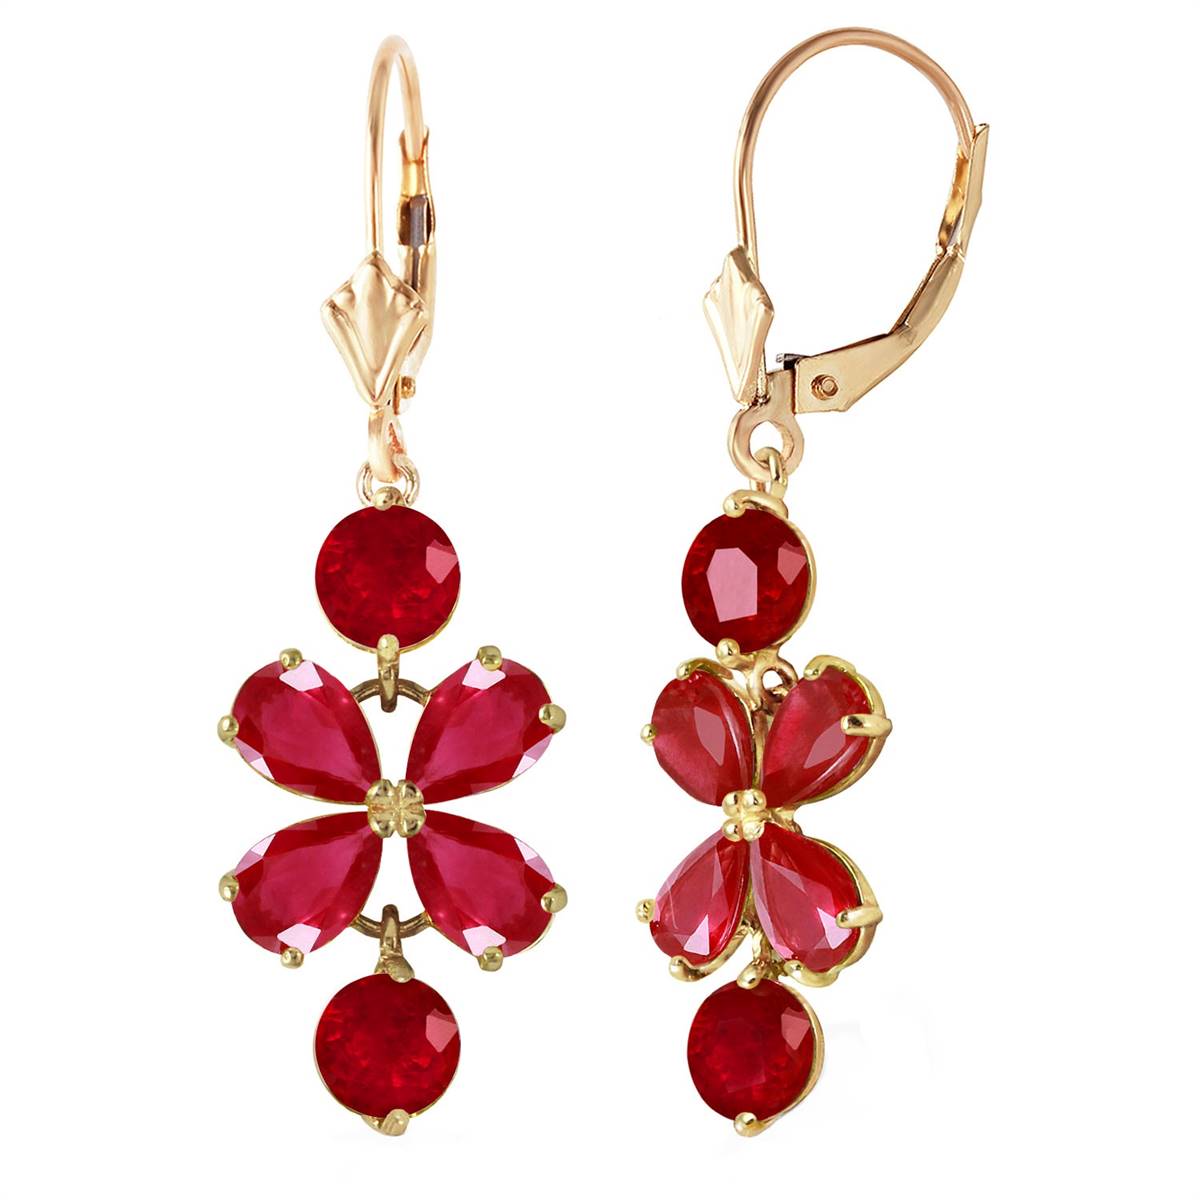 5.32 Carat 14K Solid Yellow Gold Chandelier Earrings Natural Ruby